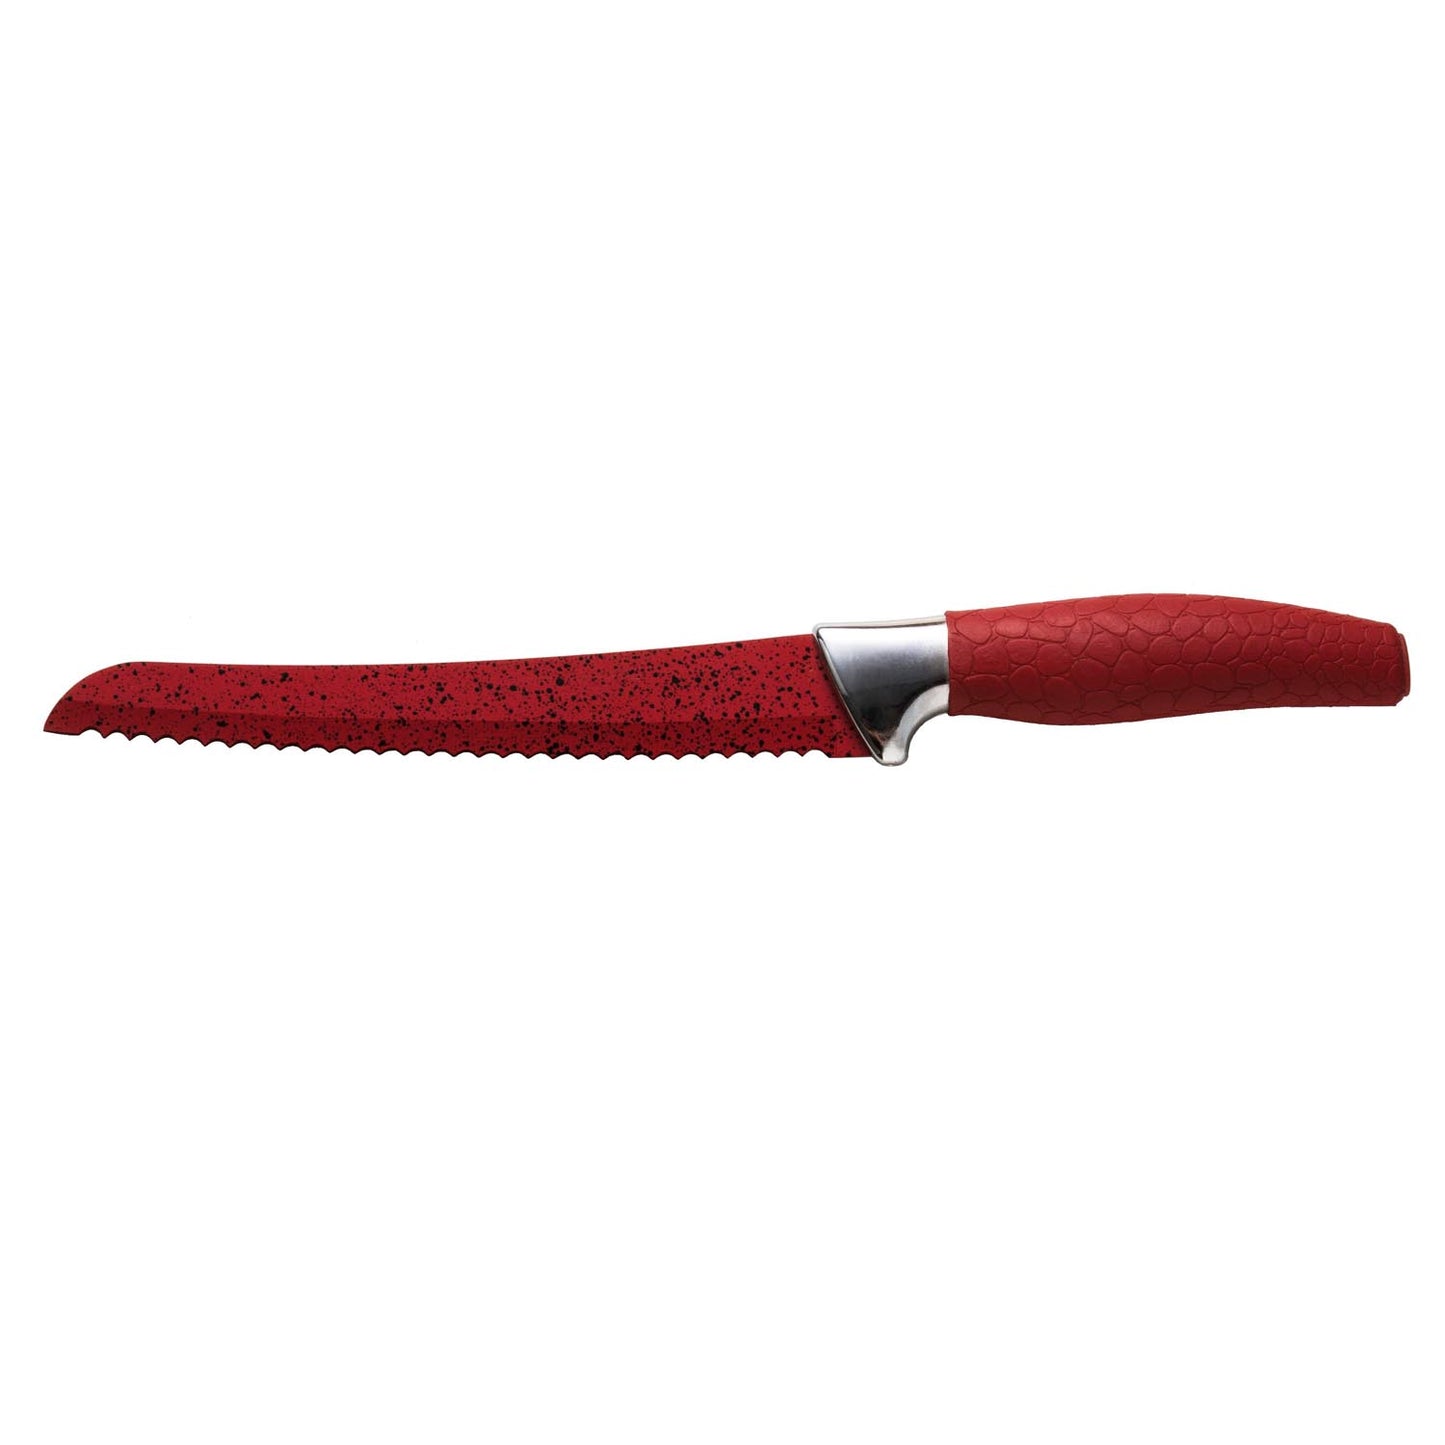 8" MARBLE COATING BREAD KNIFE - RED